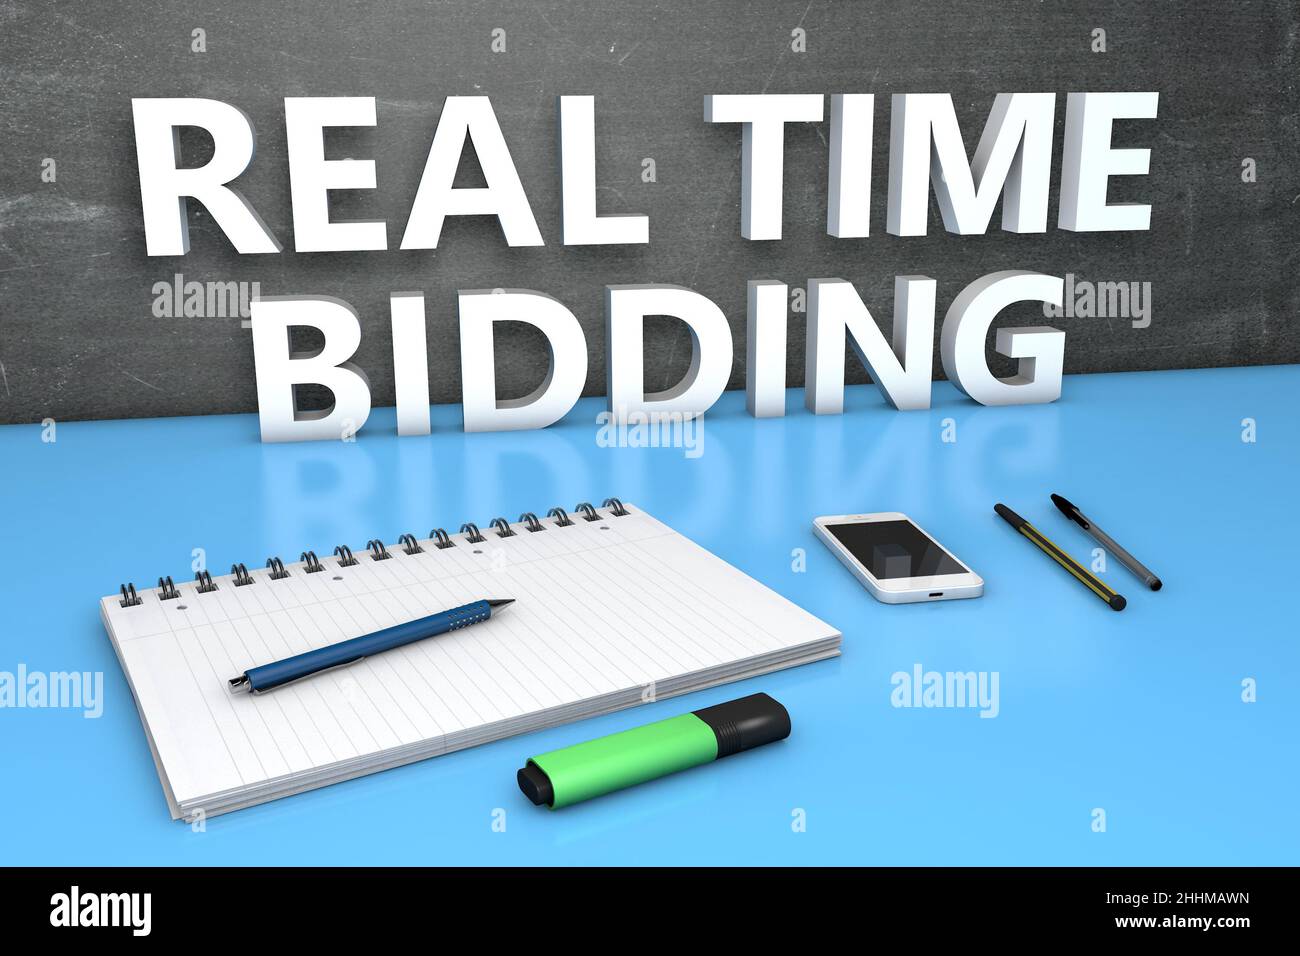 RTB - Real Time Bidding - text concept with chalkboard, notebook, pens and mobile phone. 3D render illustration. Stock Photo